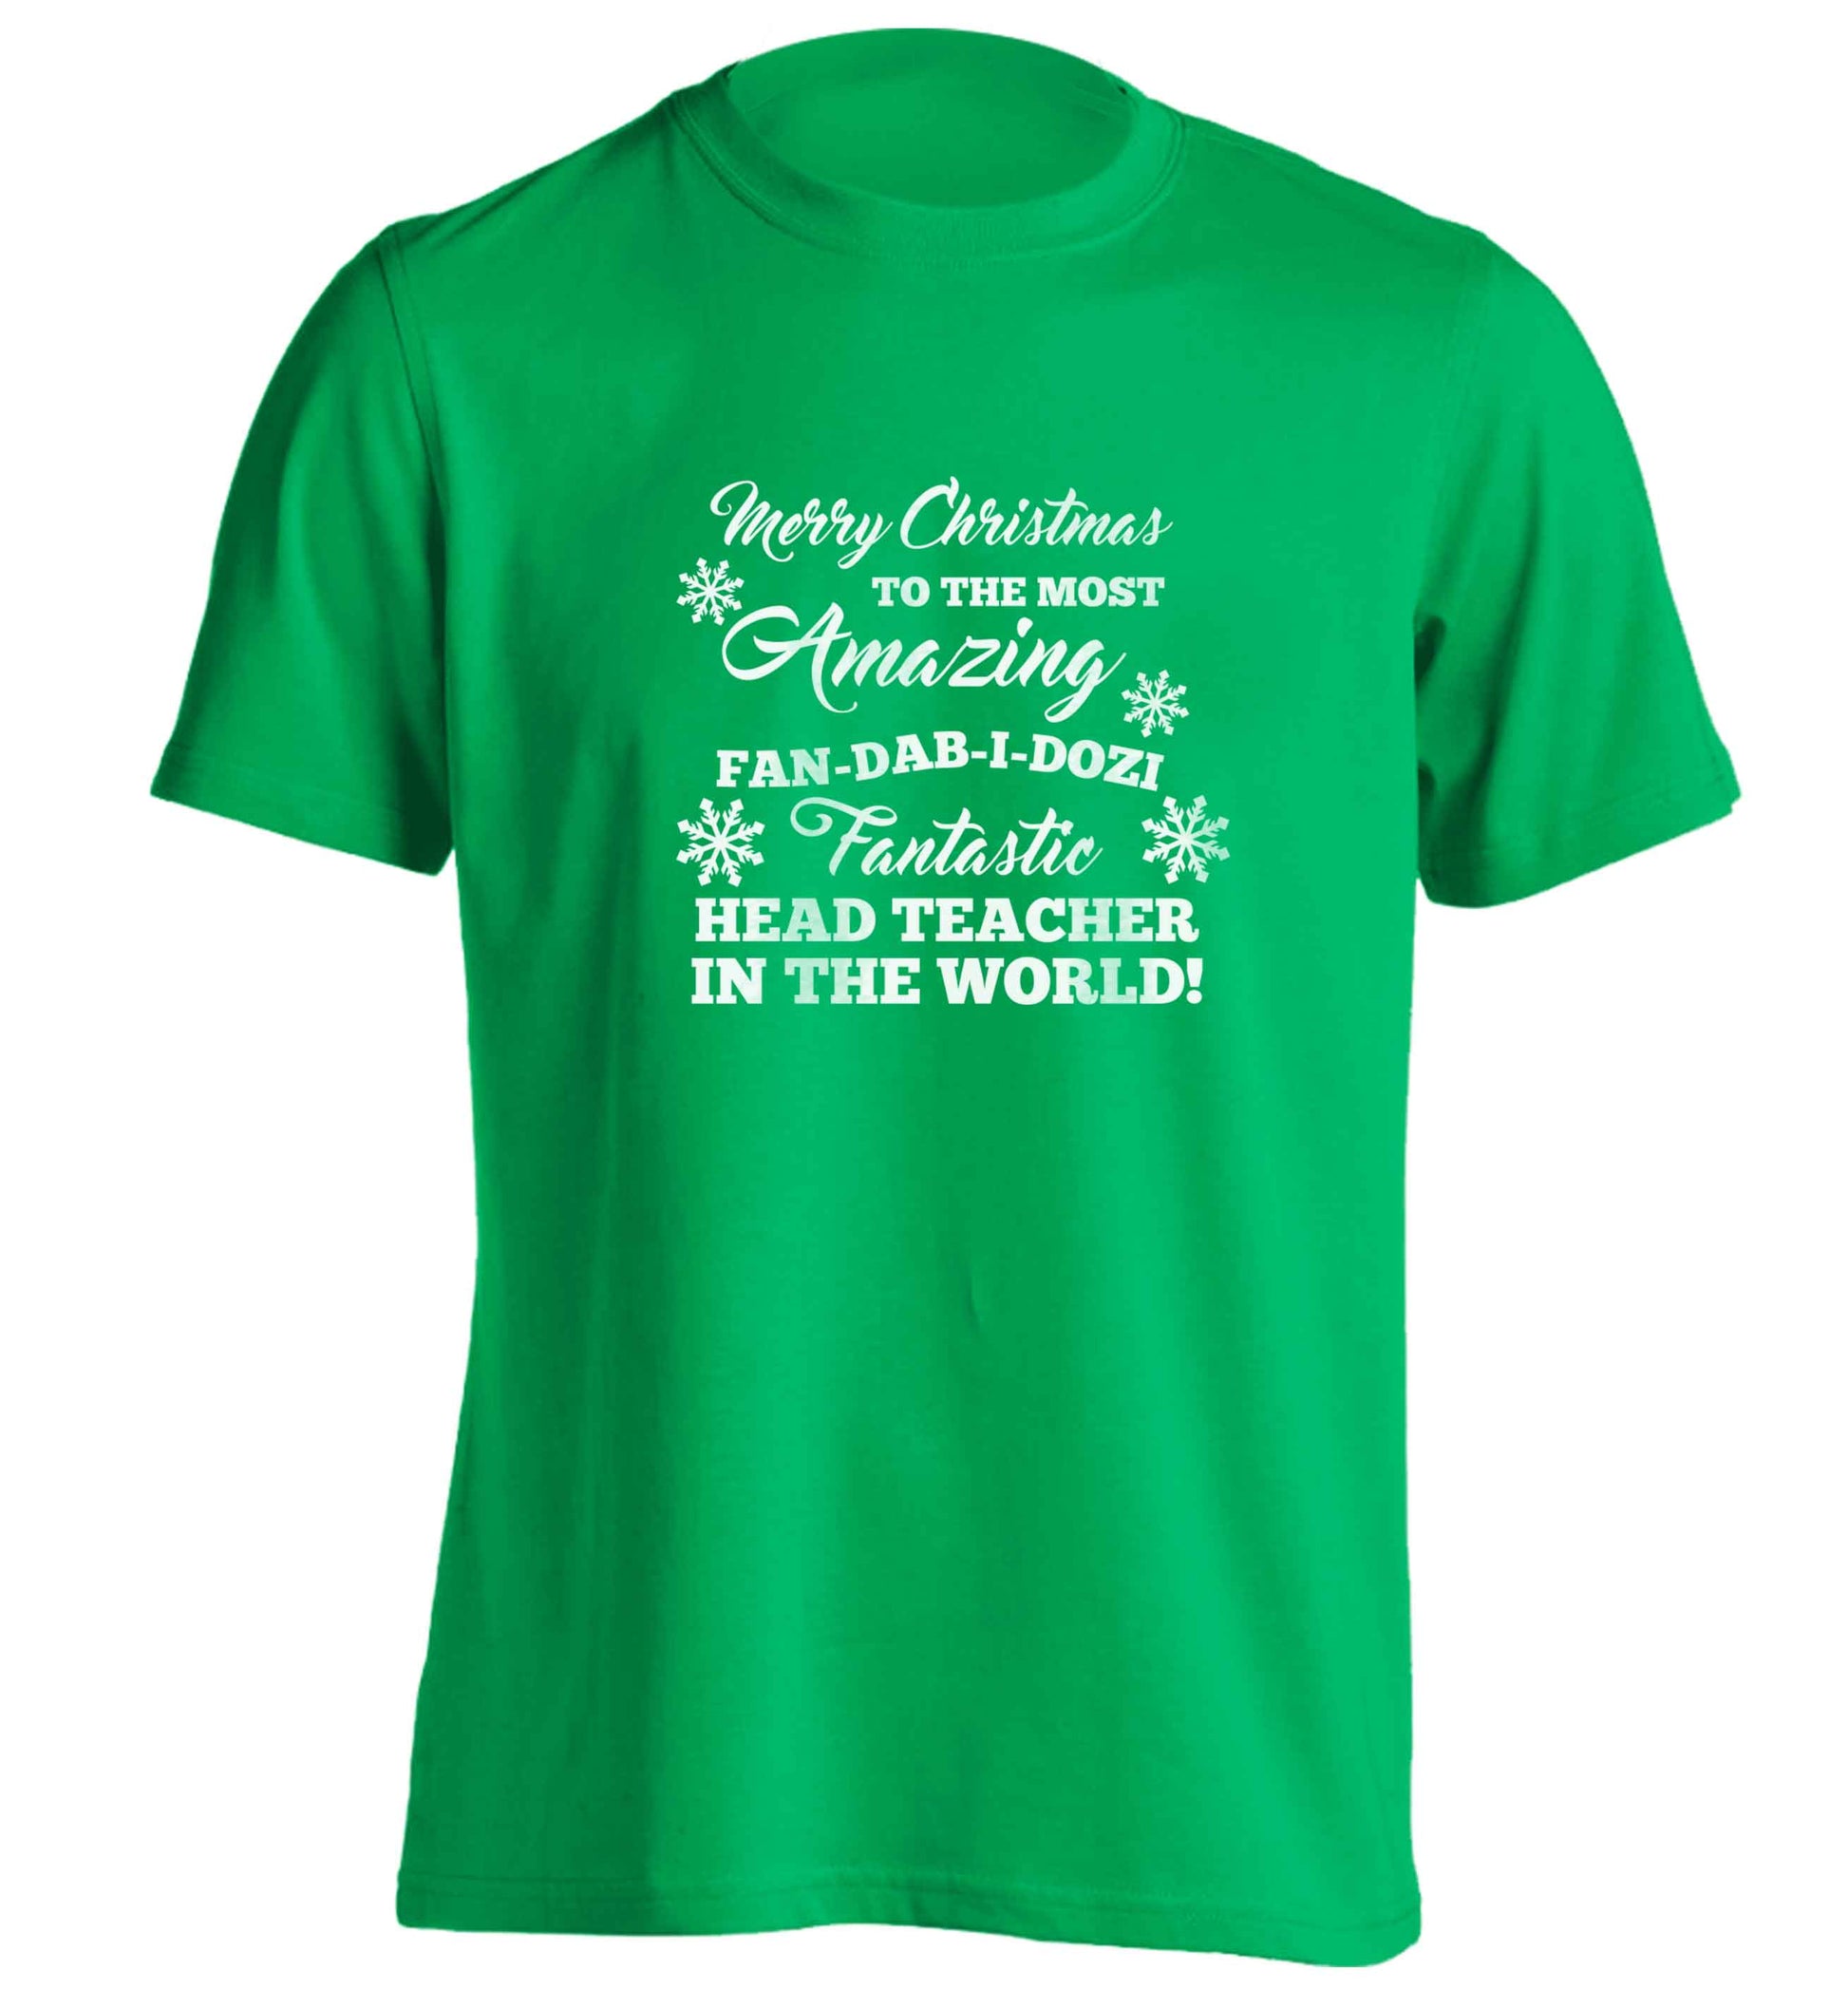 Merry Christmas to the most amazing fan-dab-i-dozi fantasic head teacher in the world adults unisex green Tshirt 2XL